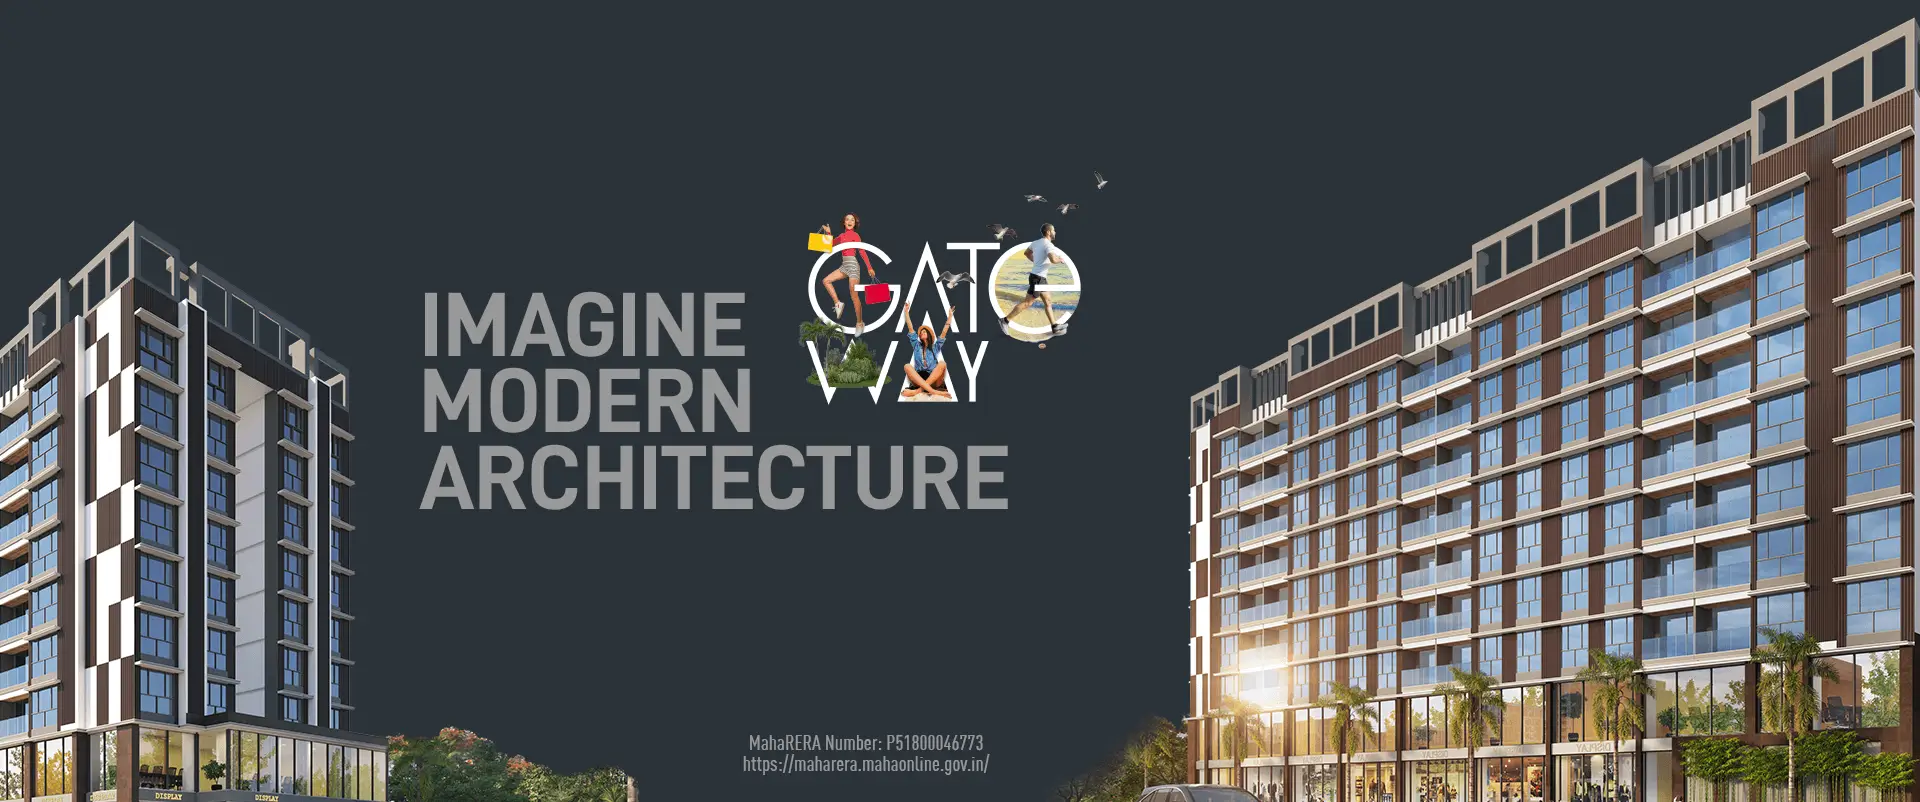 Gateway by MS Realty Project Imagine Modern Architecture 